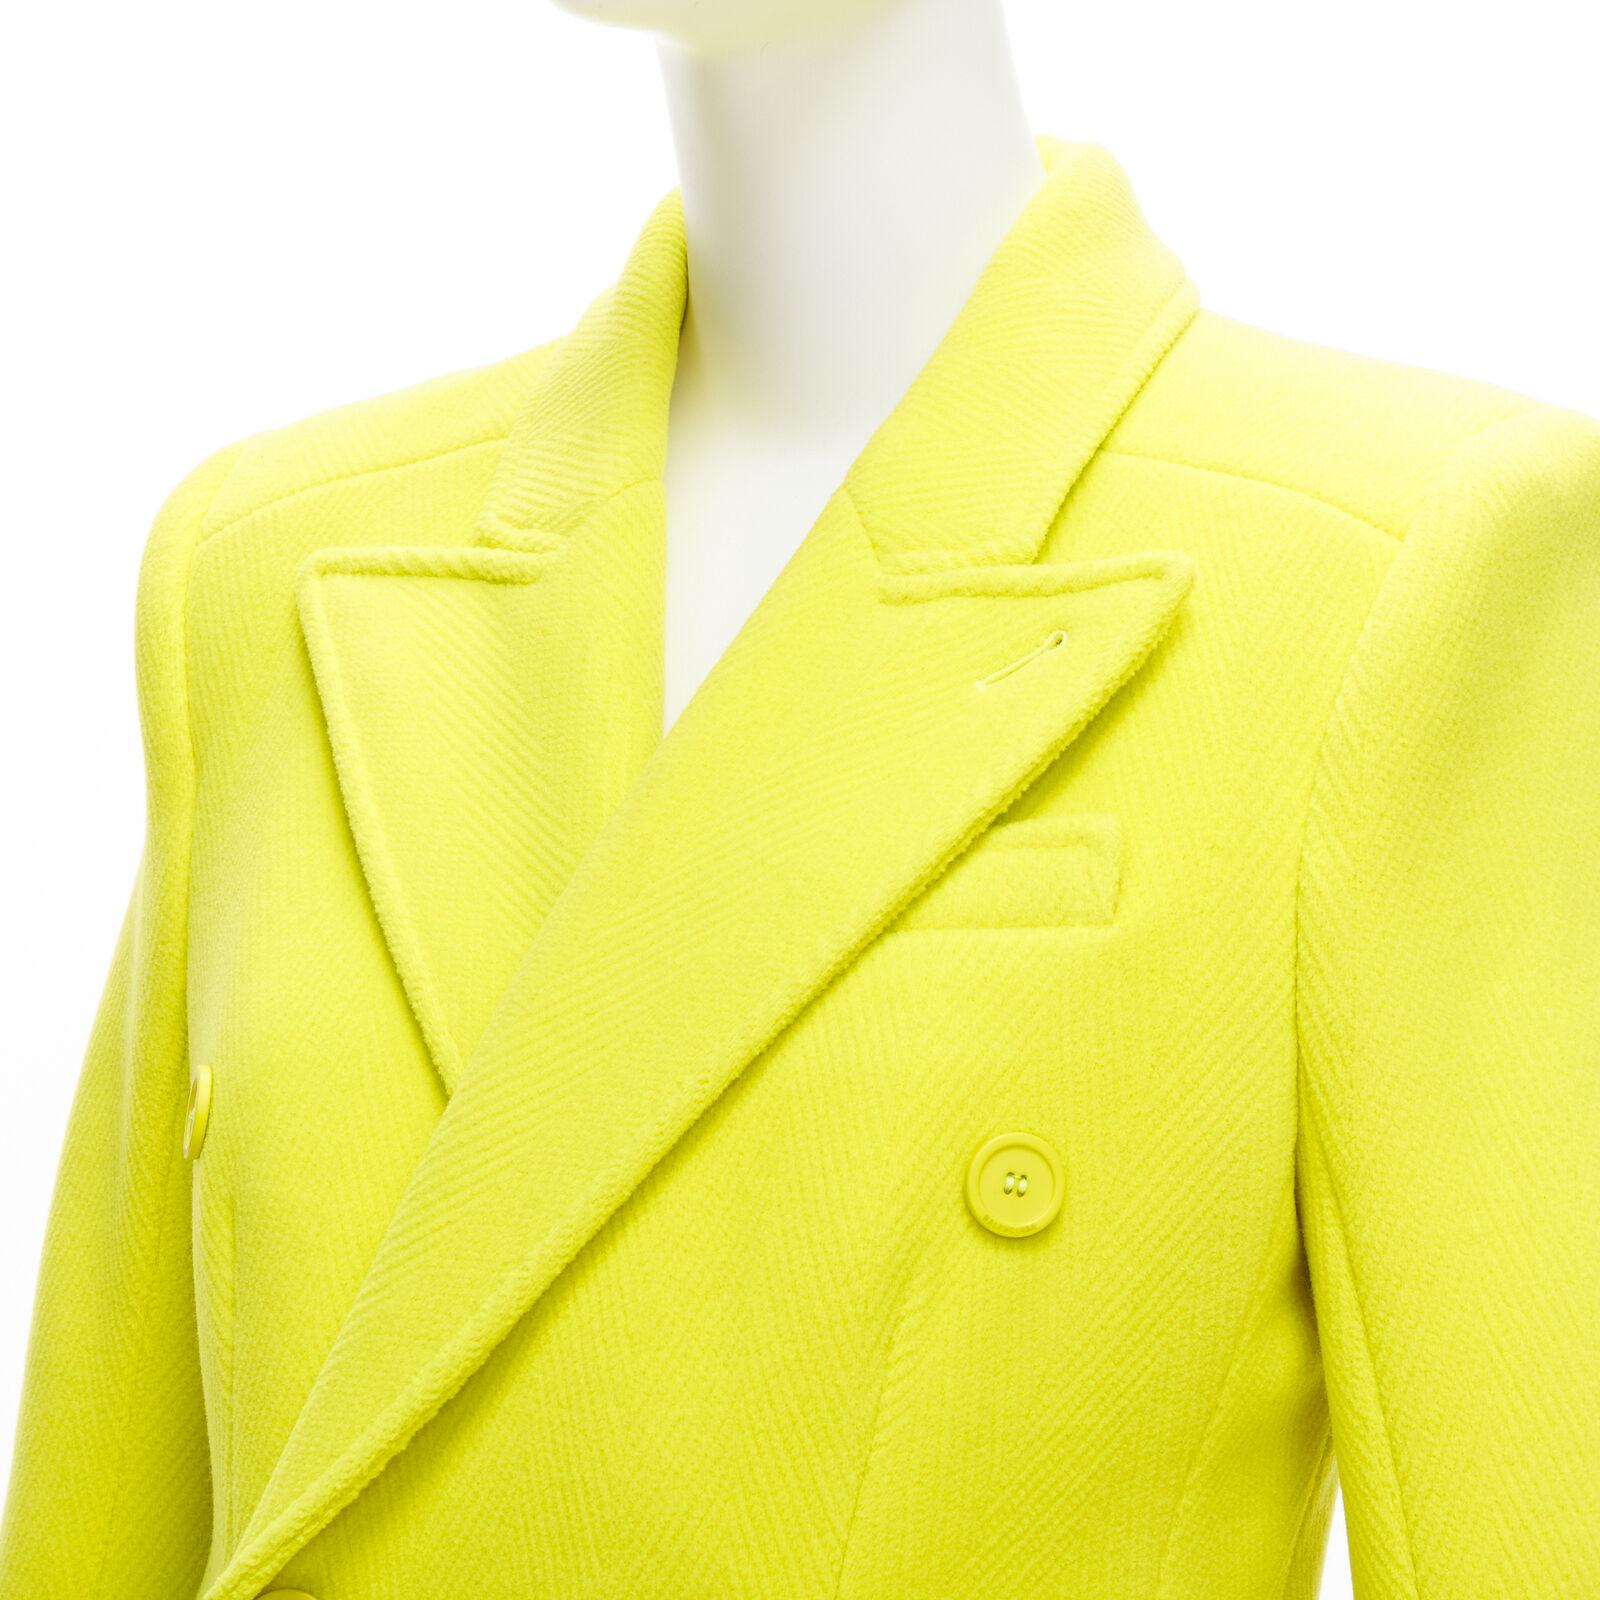 new BALENCIAGA Hourglass bright yellow wool double breasted peplum coat FR36 S
Reference: TGAS/D00584
Brand: Balenciaga
Designer: Demna
Model: Hourglass
Collection: 2019
Material: Virgin Wool, Polyamide
Color: Neon Yellow
Pattern: Solid
Closure: